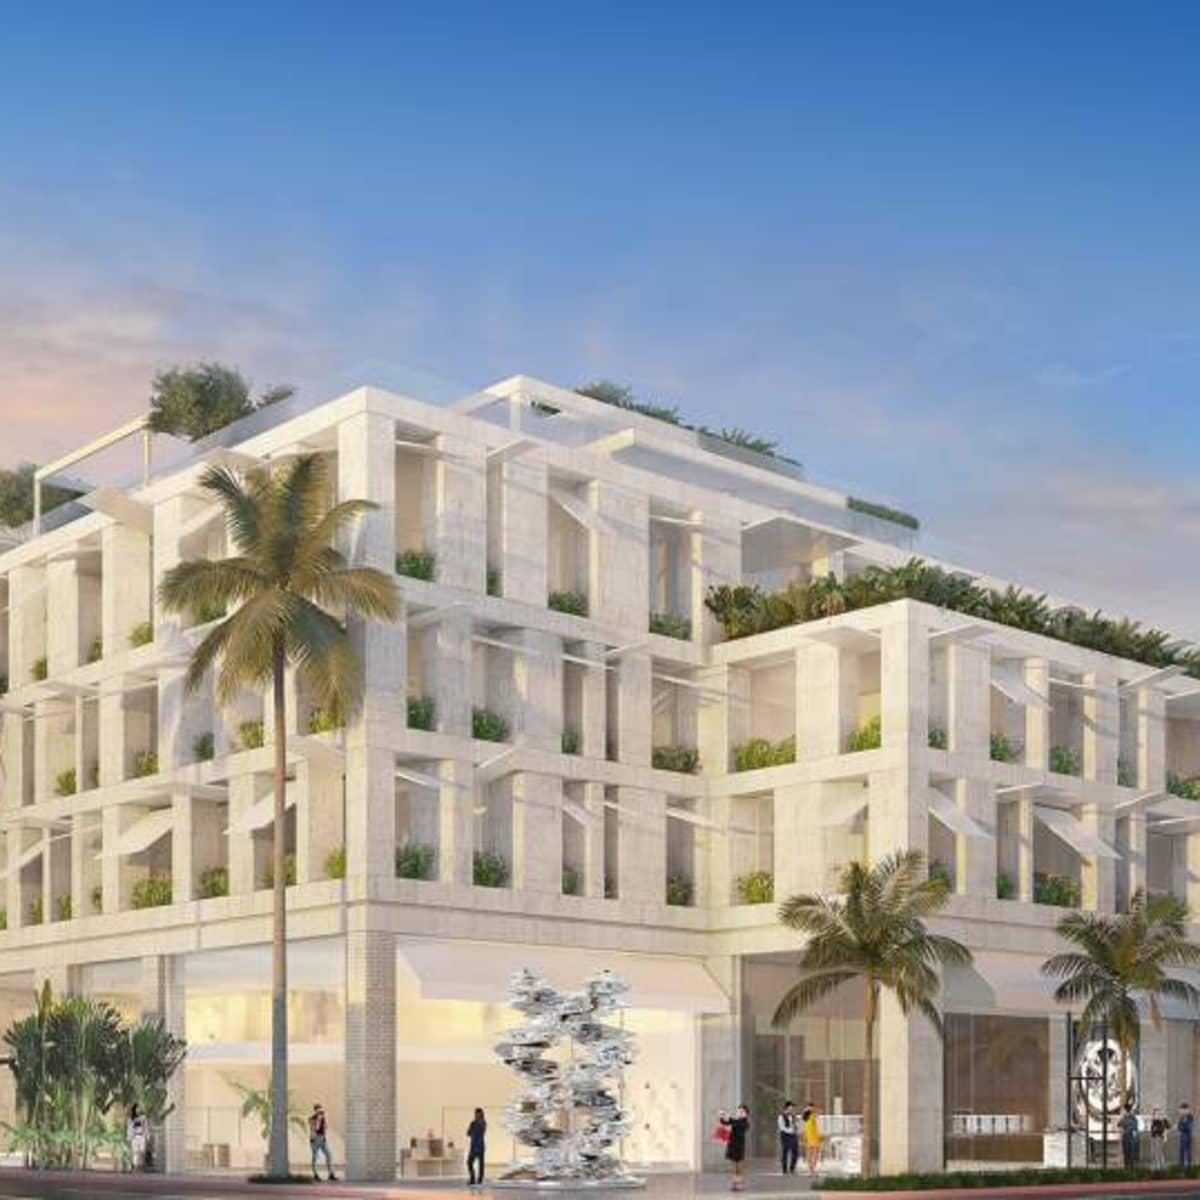 LVMH's luxury hotel project approved - Los Angeles Business Journal